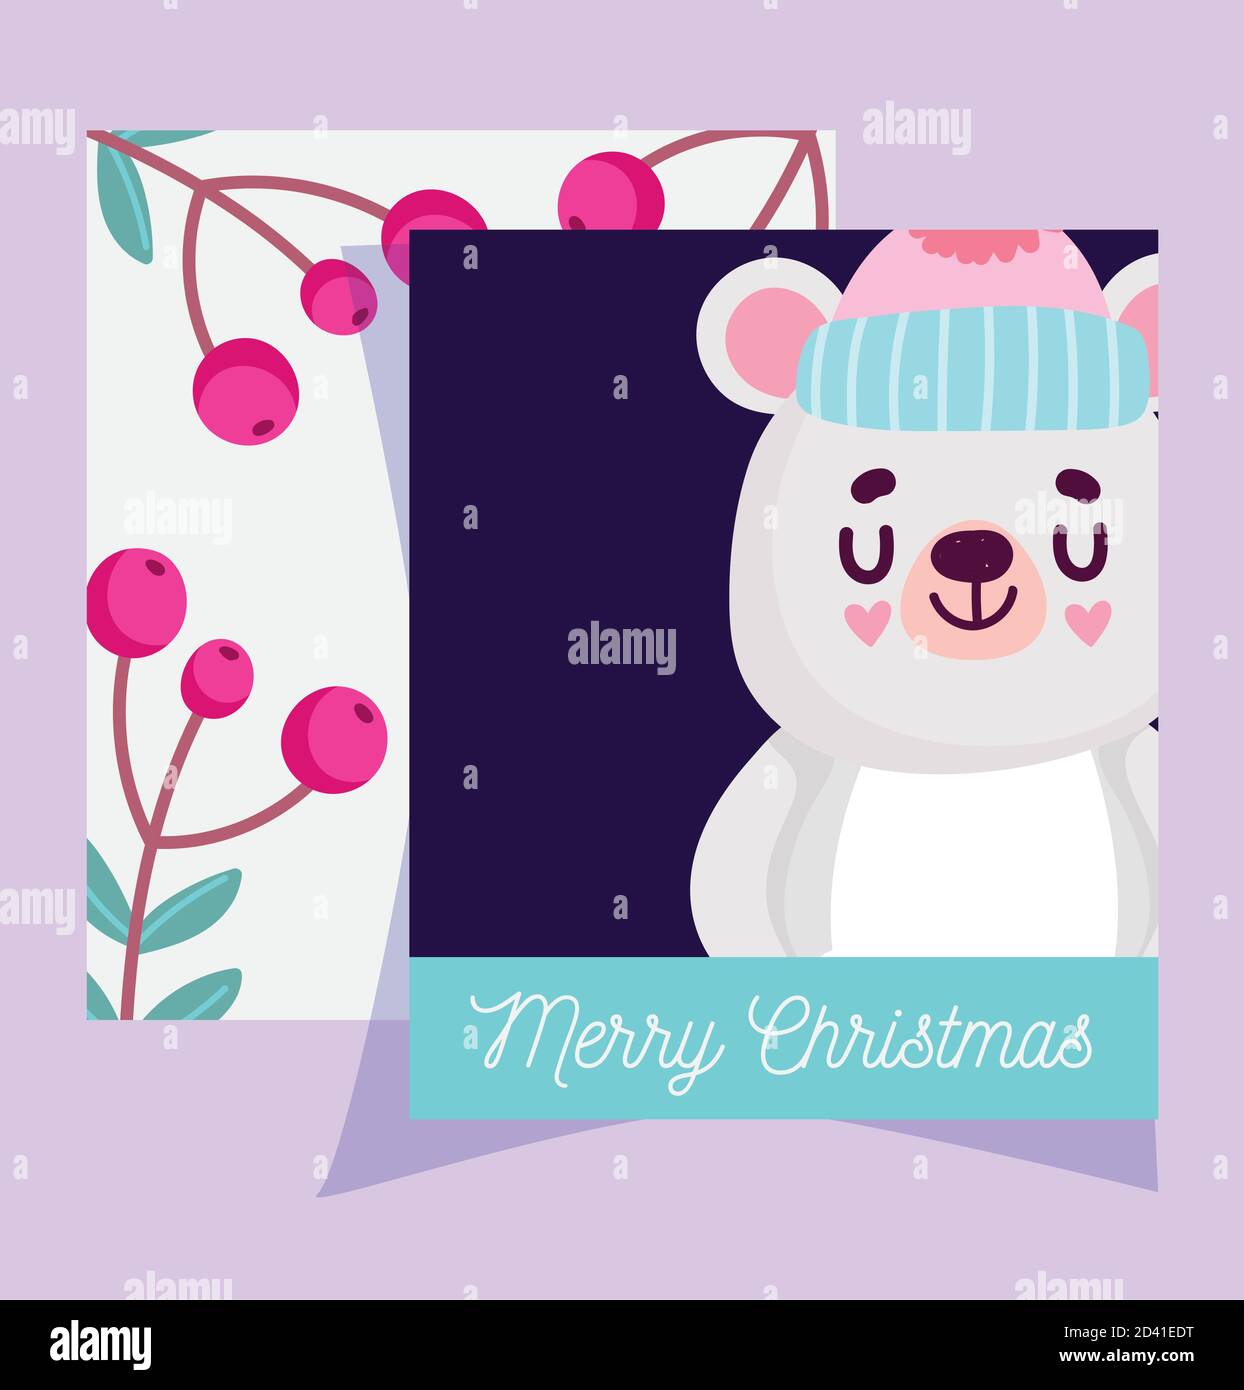 merry christmas, bear with hat holly berry banner vector illustration ...